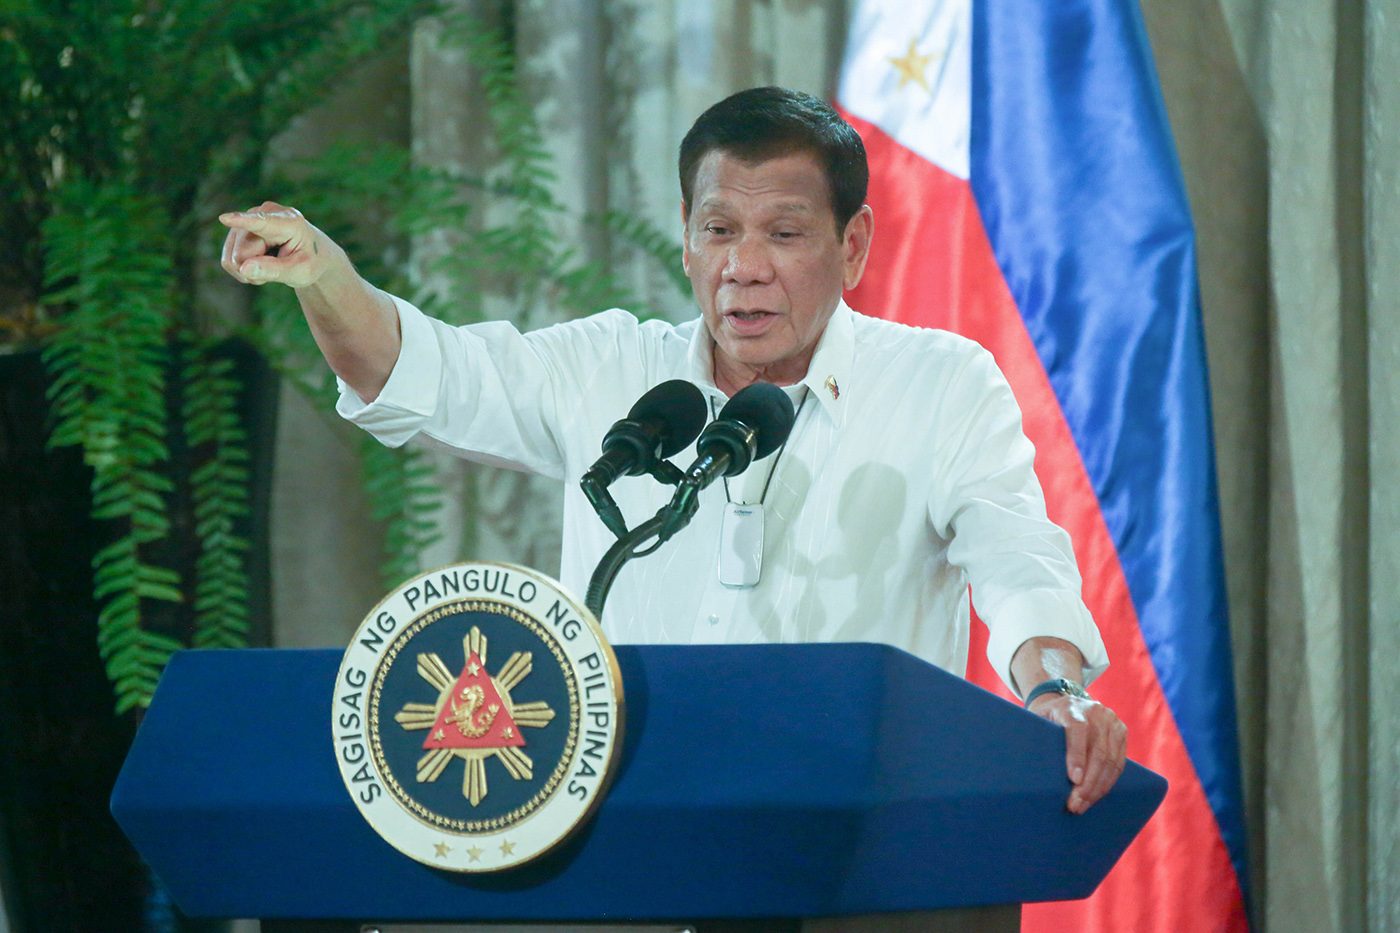 After Senate files VFA petition, Duterte insists: ‘I refuse to be compelled’